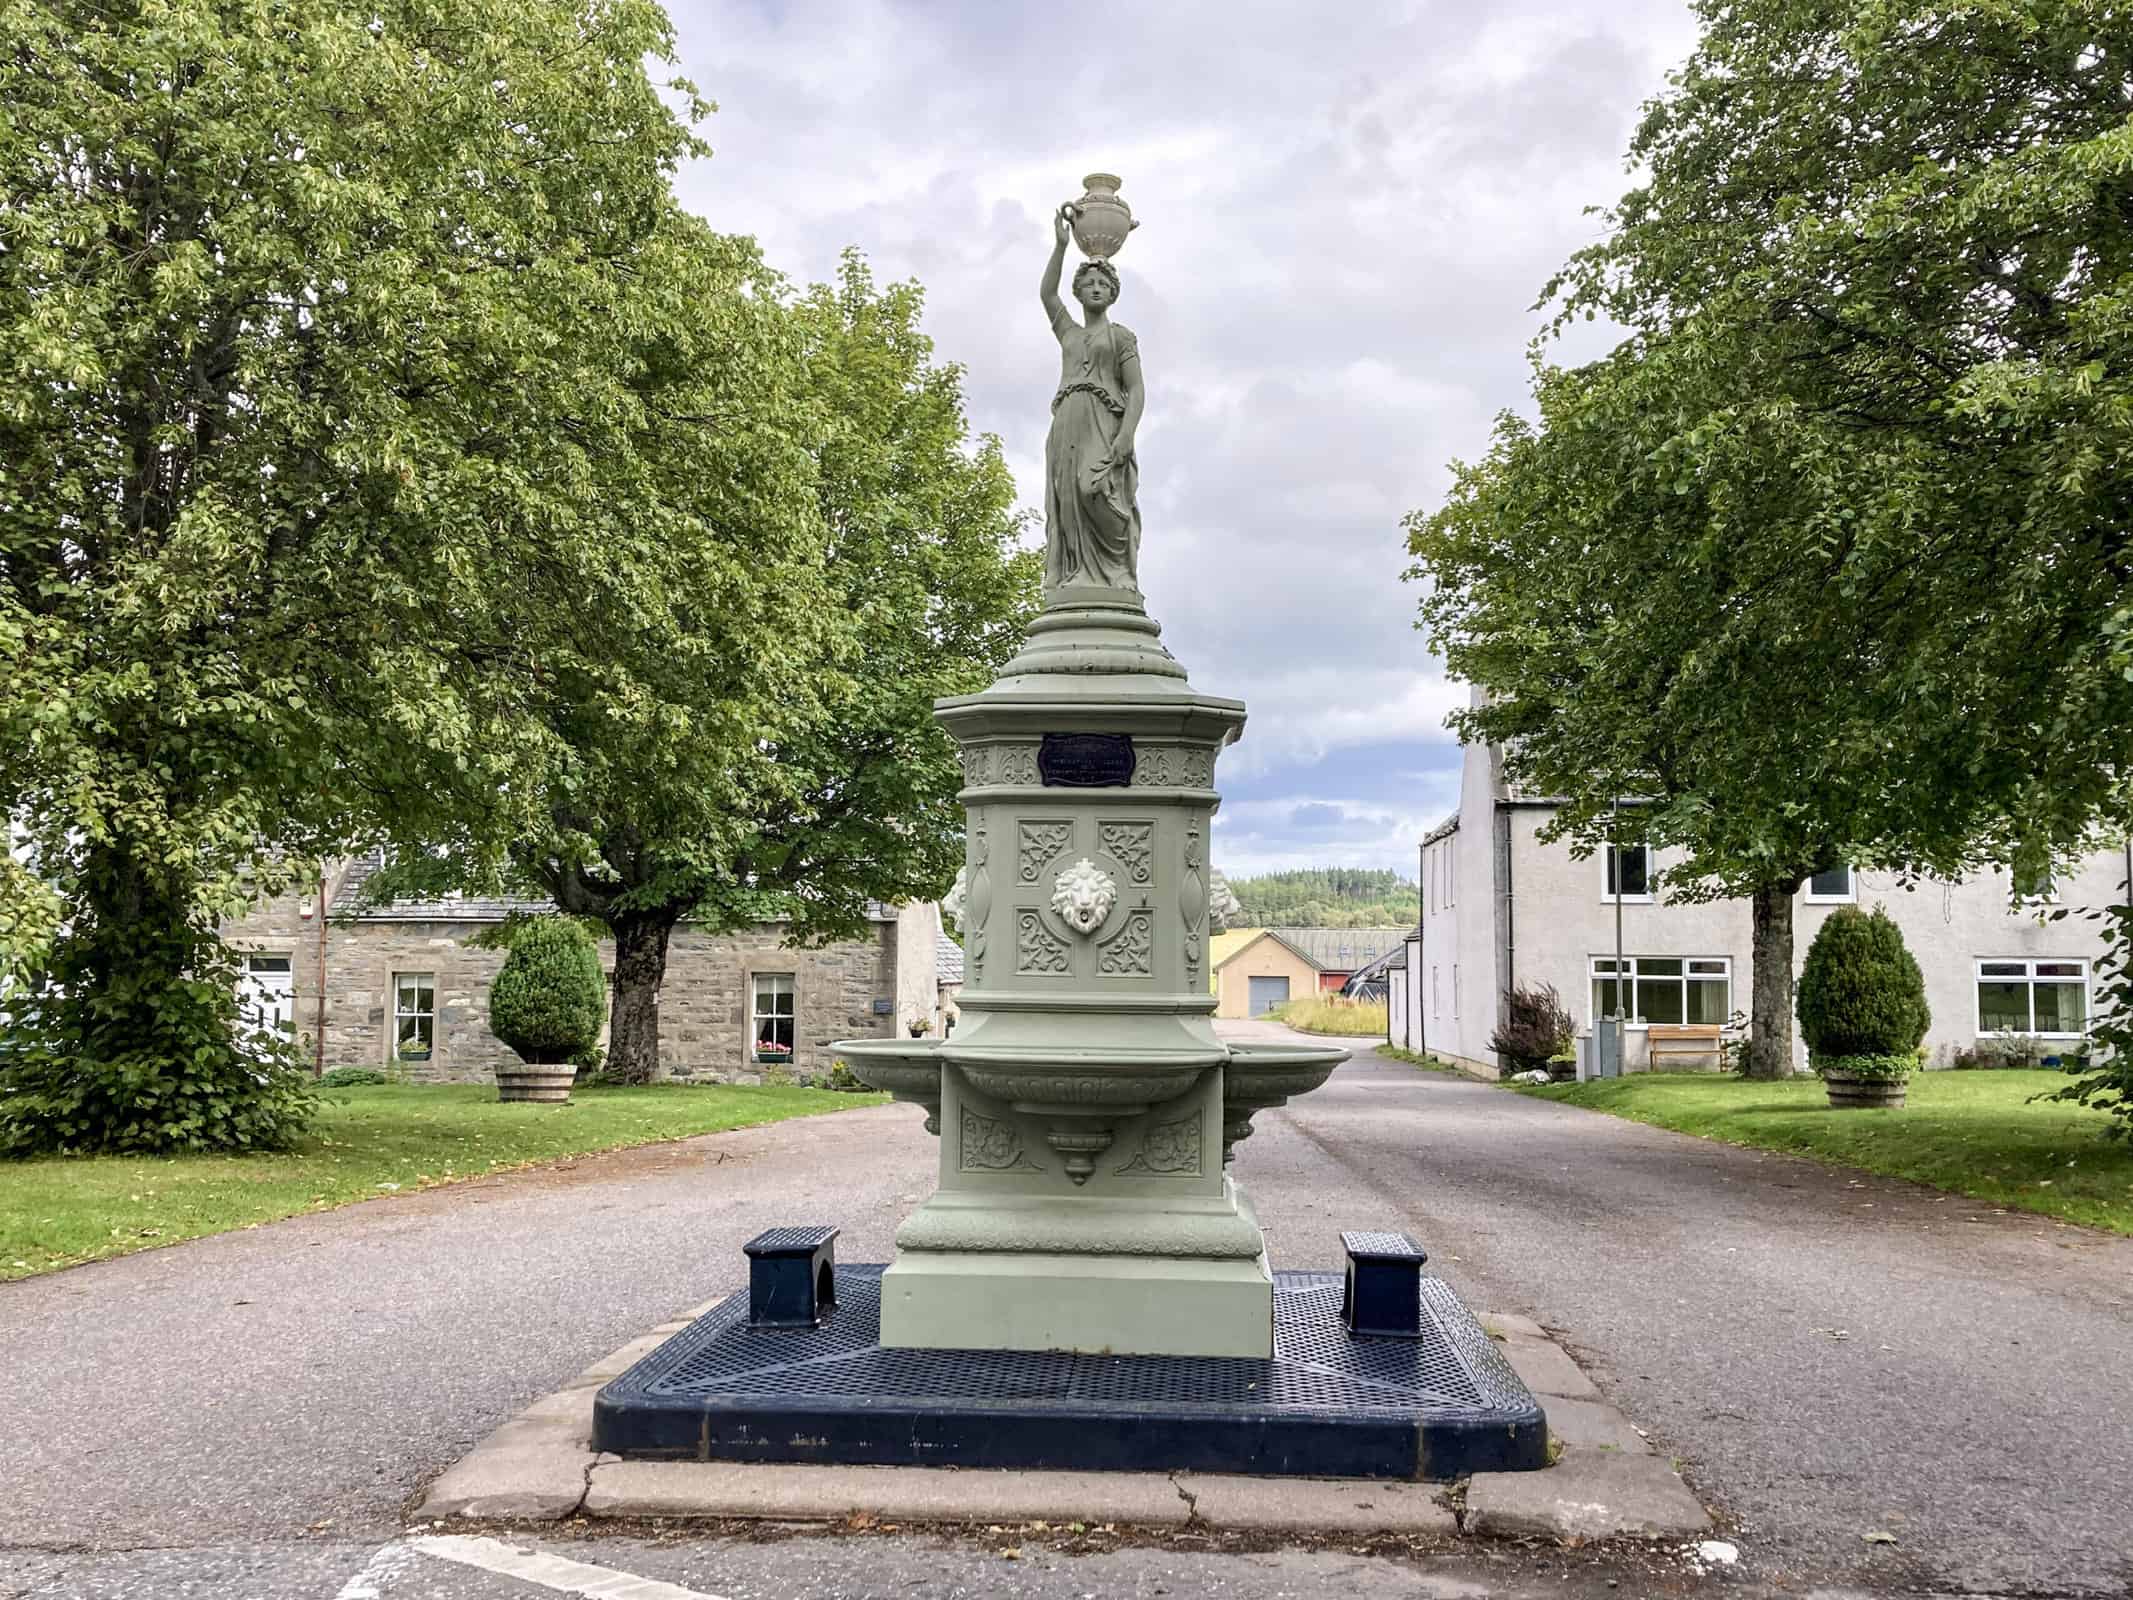 Fountain at the centre of the village